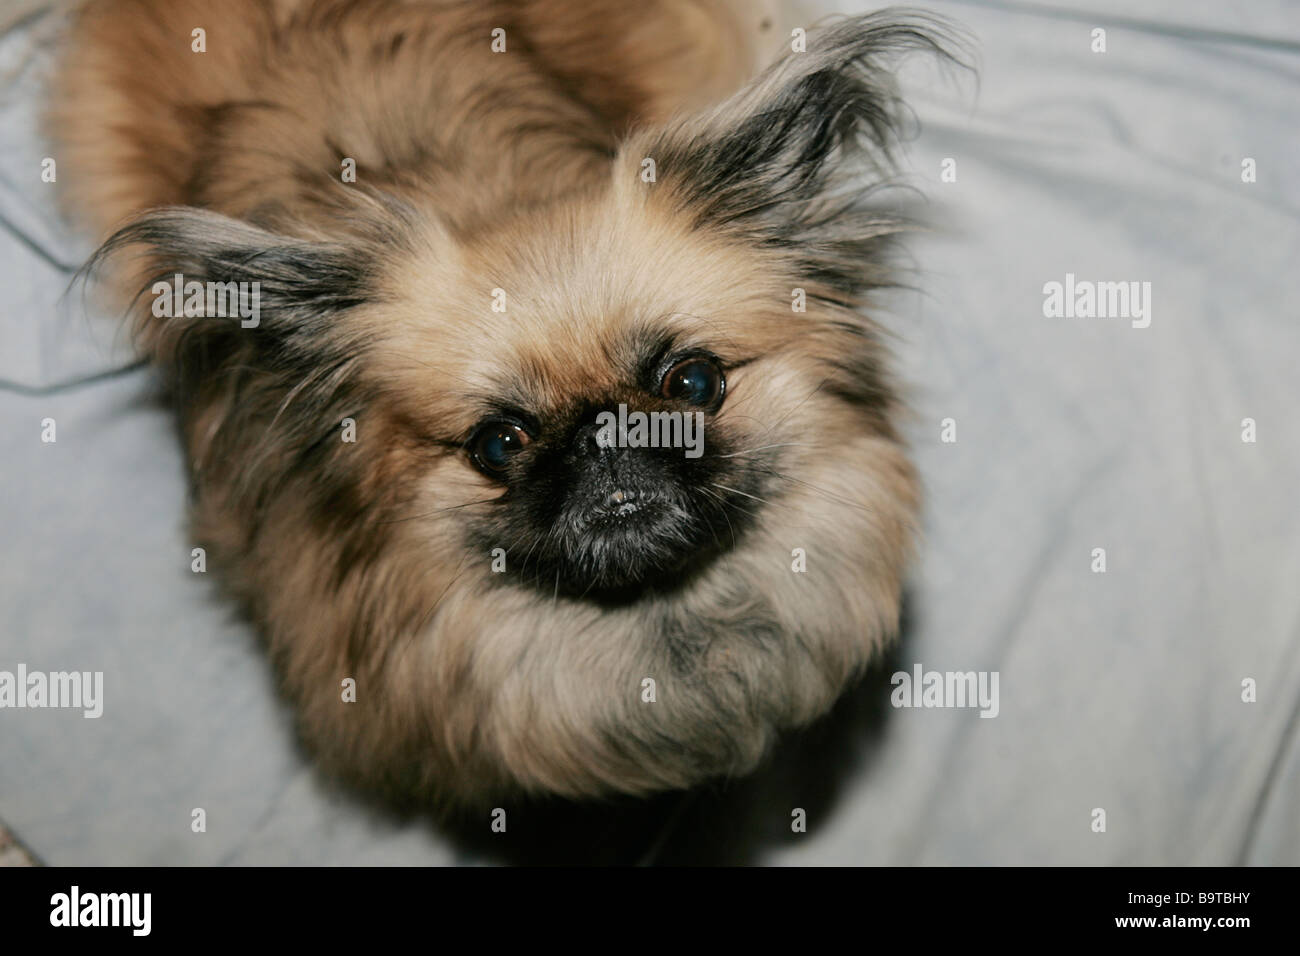 Thed adorable face of a Pekingese breed type of dog Stock Photo